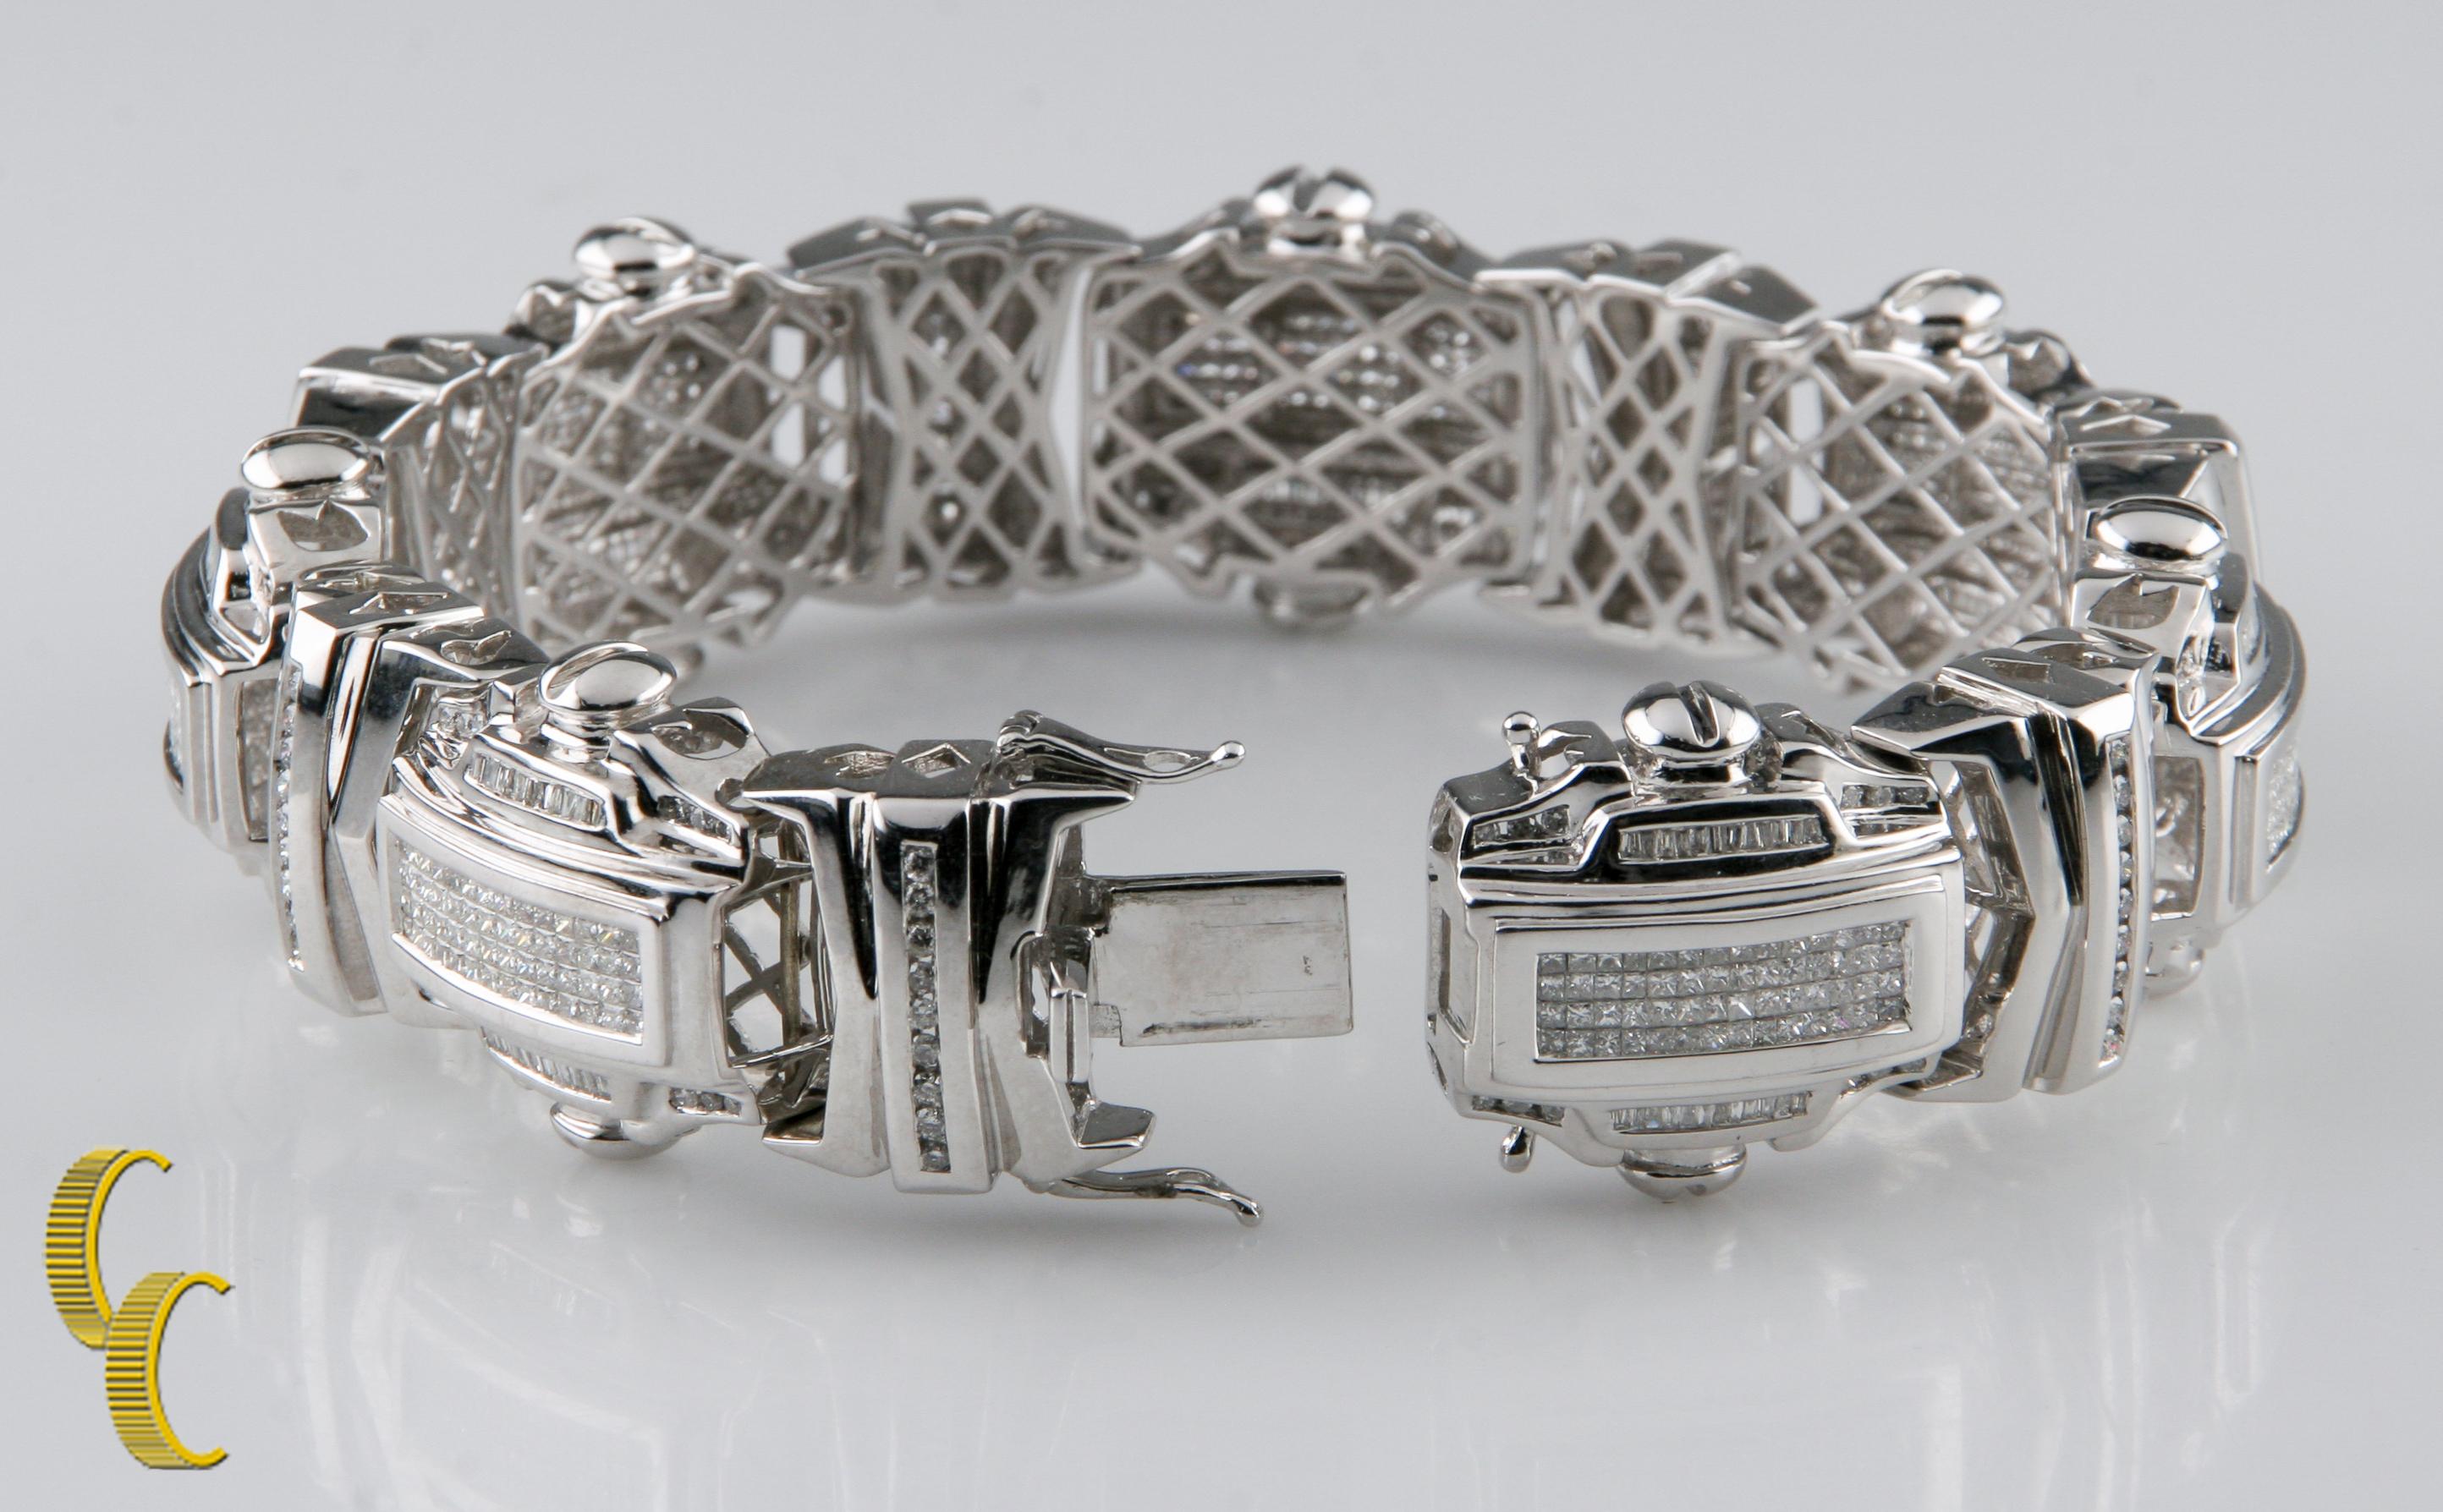 Gorgeous Large 14k White Gold Plaque Bracelet Featuring Articulating Diamond-Set Plaques and Links
Each Plaque and Link is Set in a Large Gallery with Delicate Wire Work on Reverse
Large Plaques Feature Invisible-Set Princess Cut Diamonds, Channel